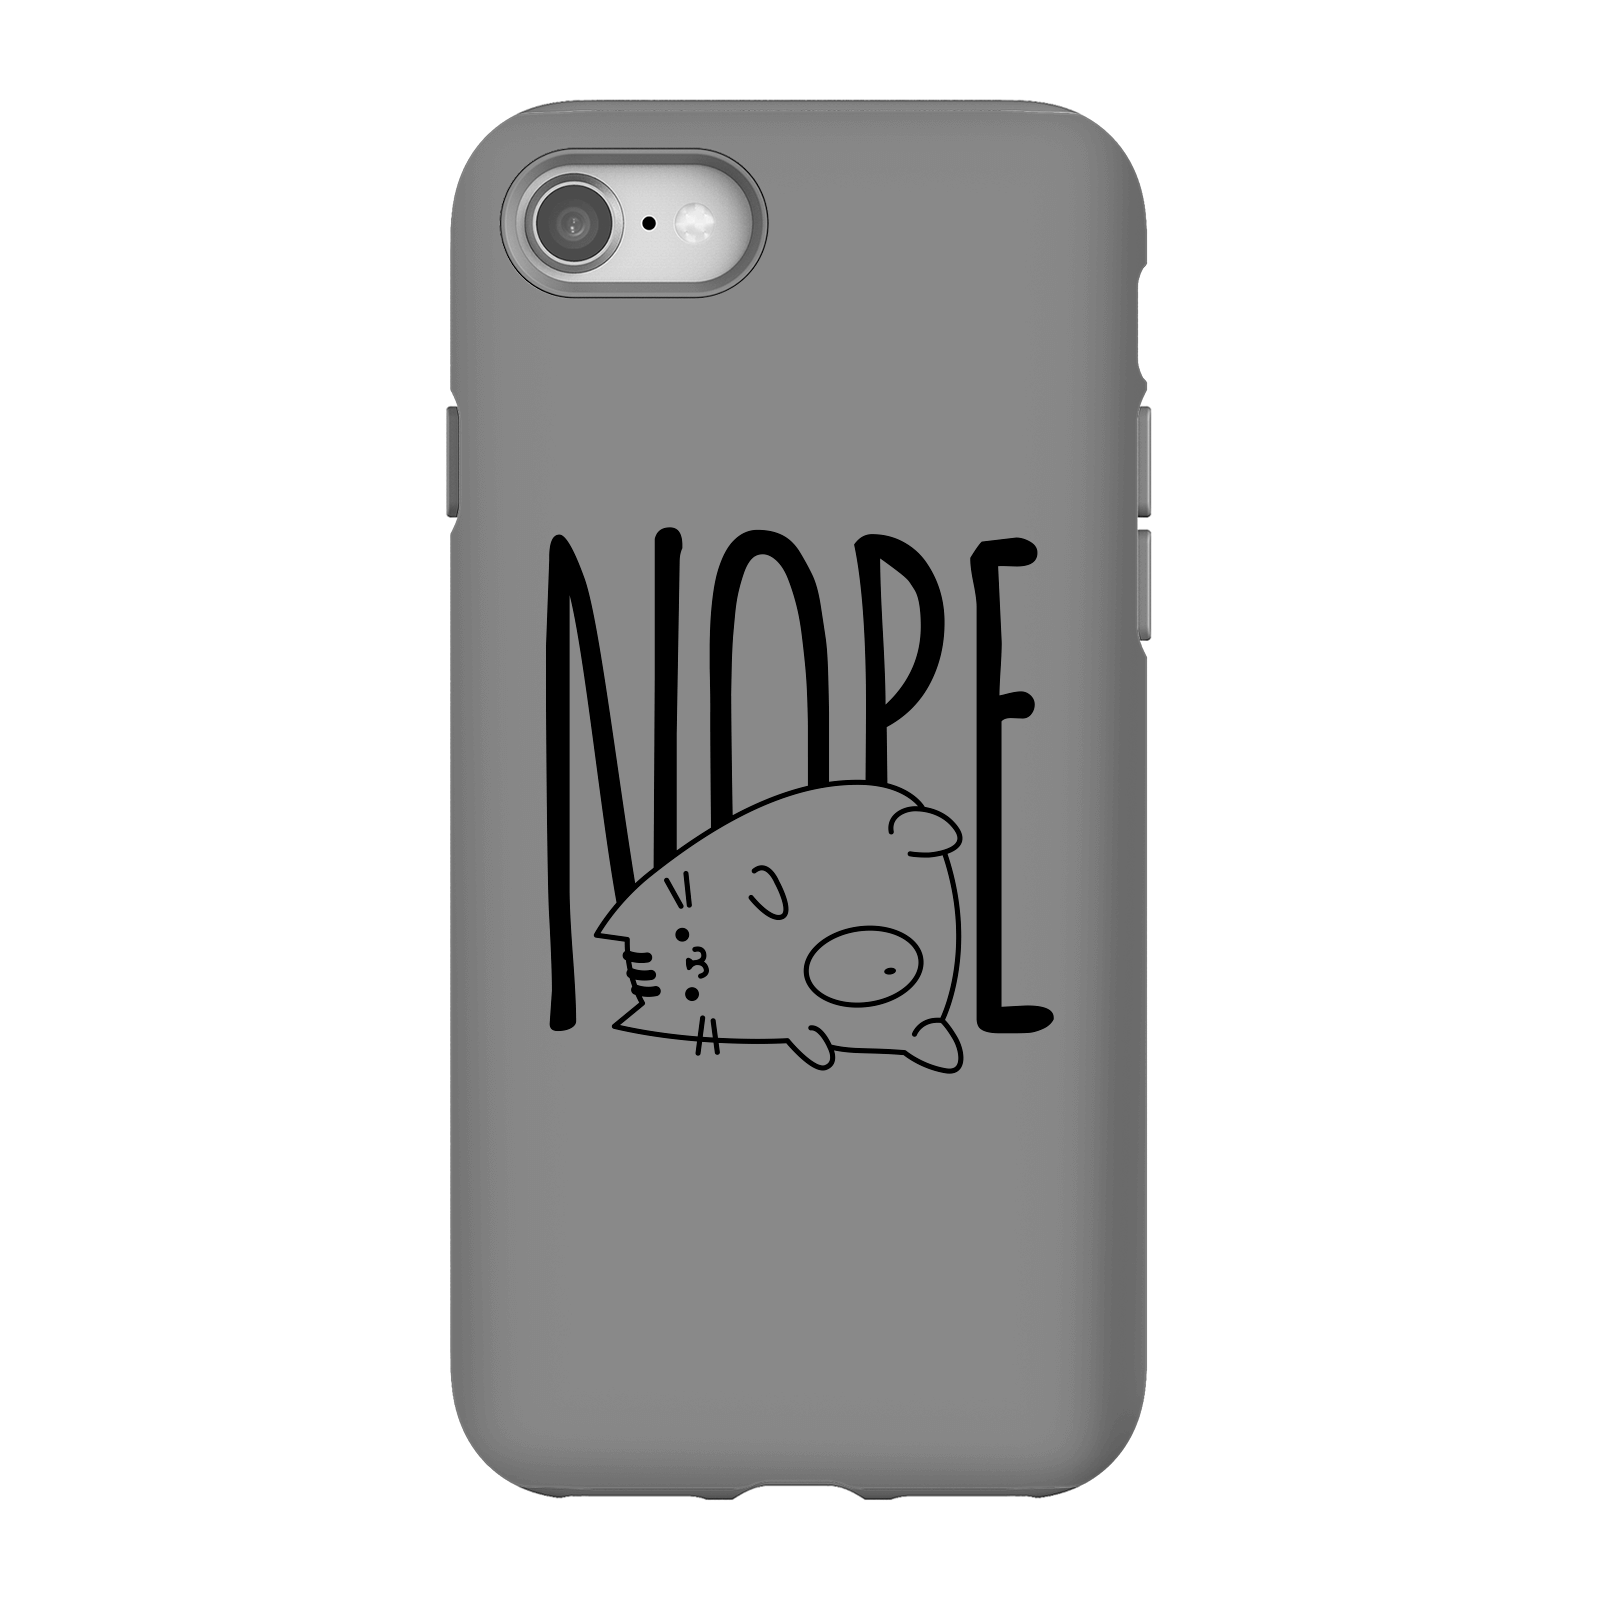 Nope Phone Case for iPhone and Android - iPhone 8 - Tough Case - Gloss